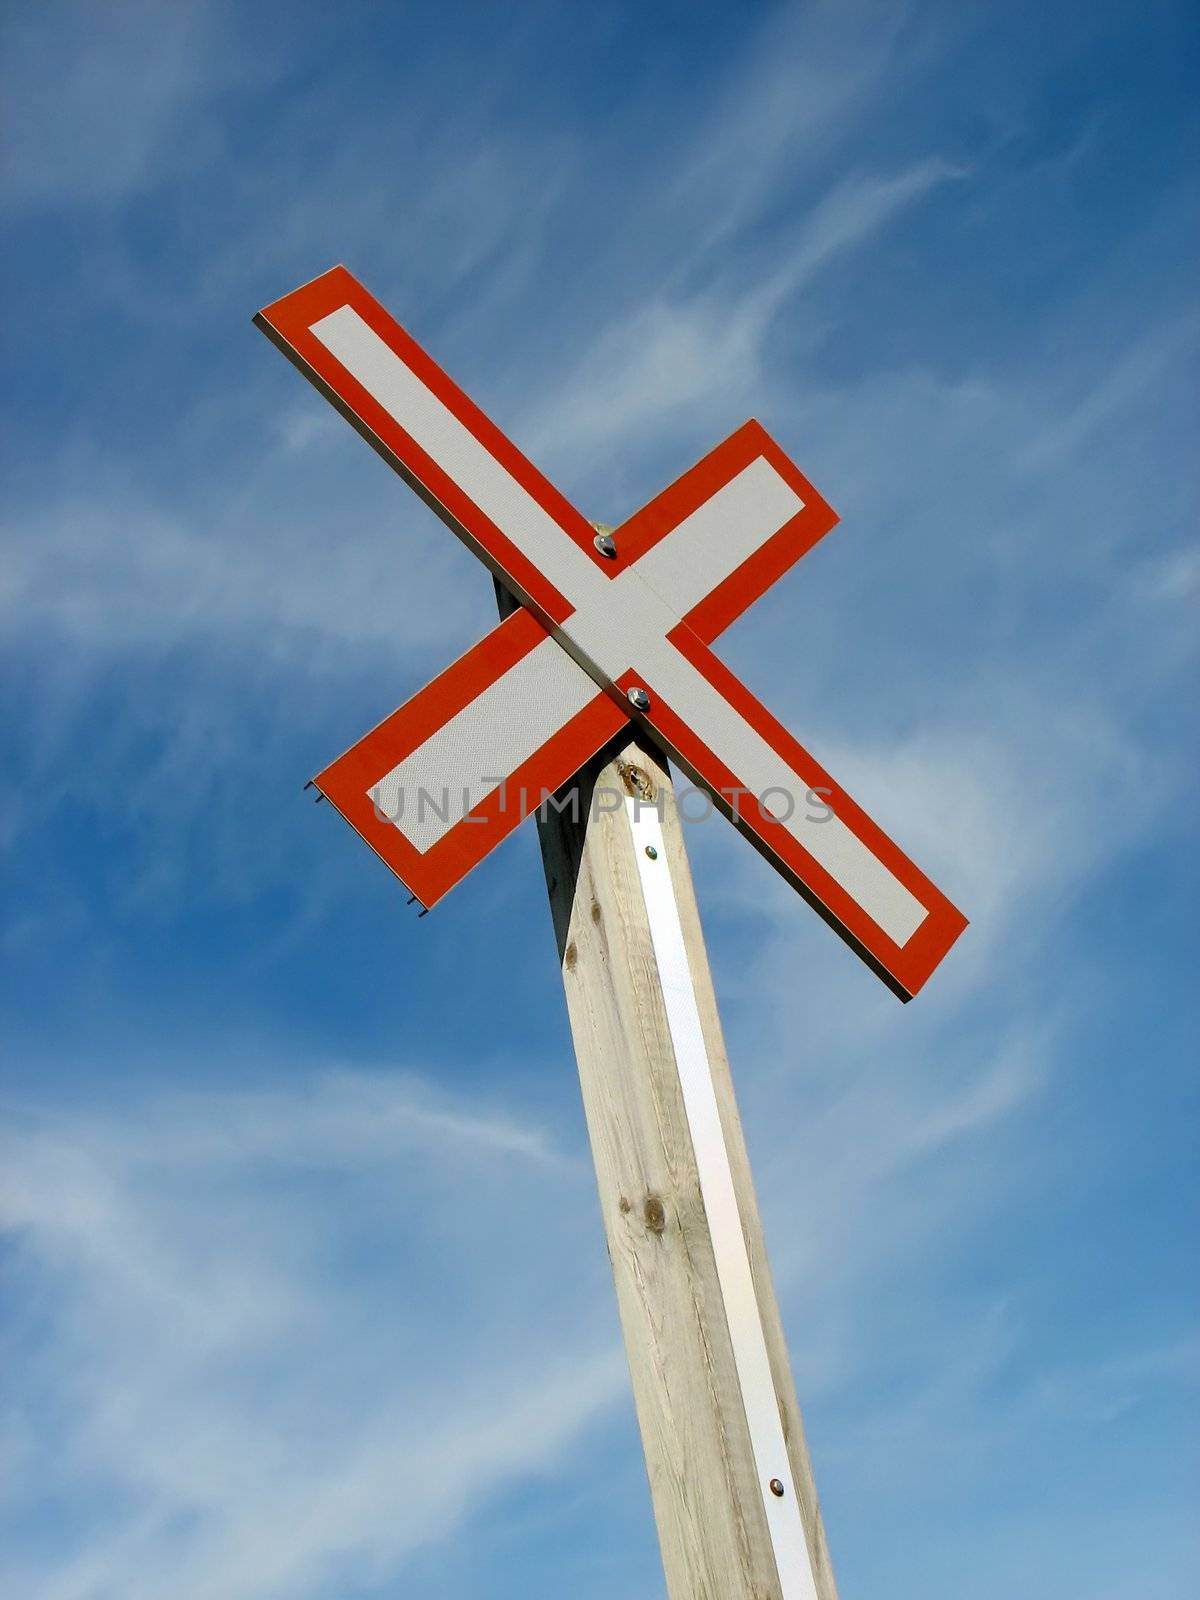 Railroad crossing sign on a blue sky background by anikasalsera